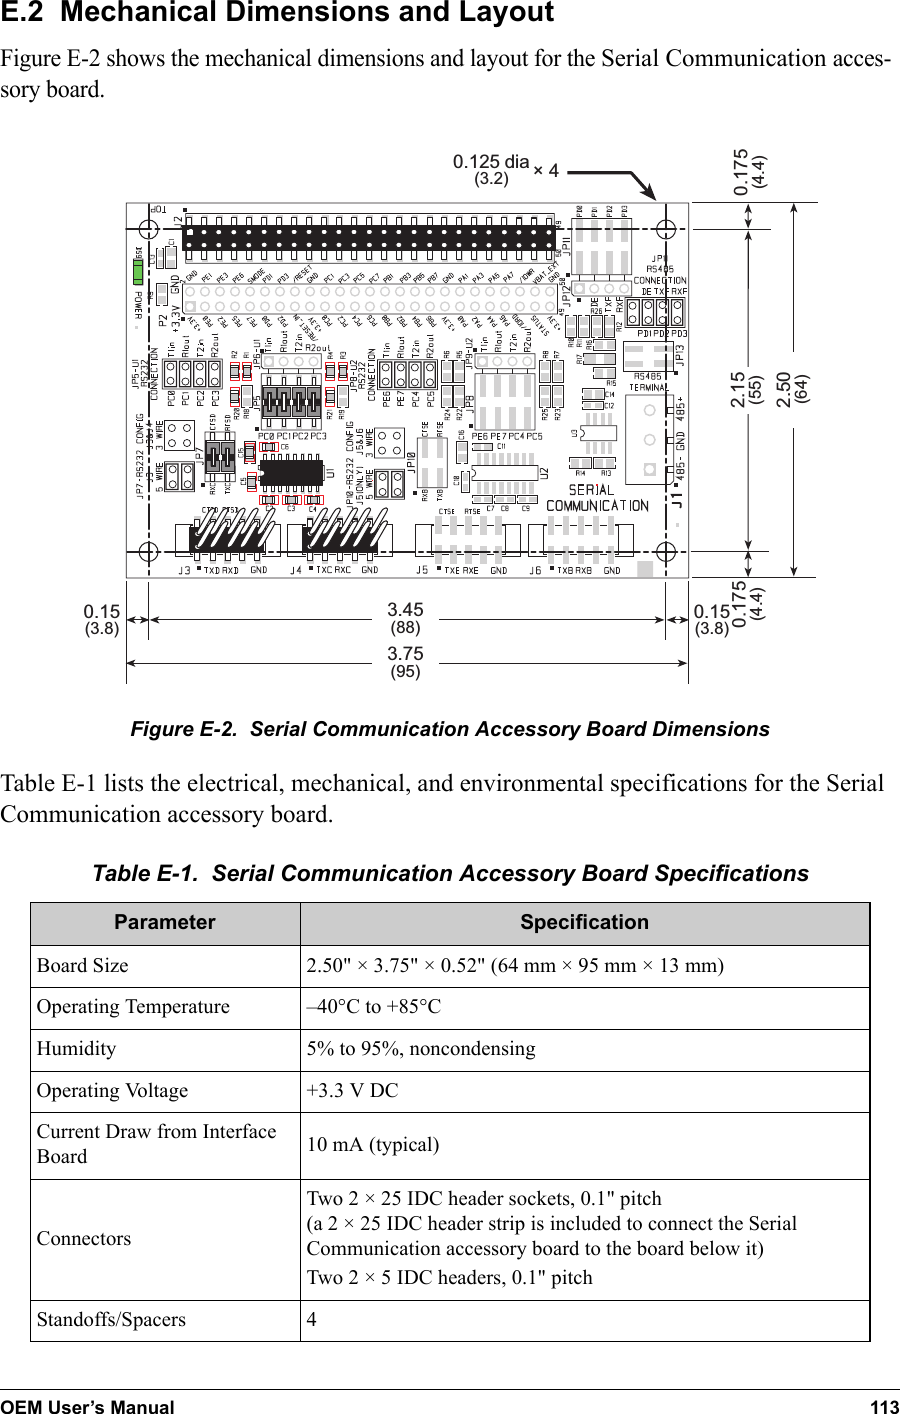 OEM User’s Manual 113E.2  Mechanical Dimensions and LayoutFigure E-2 shows the mechanical dimensions and layout for the Serial Communication acces-sory board.0.15(3.8)0.15(3.8)0.175(4.4)3.45(88)3.75(95)2.50(64)0.175(4.4)× 40.125 dia(3.2)2.15(55)Figure E-2.  Serial Communication Accessory Board DimensionsTable E-1 lists the electrical, mechanical, and environmental specifications for the Serial Communication accessory board.Table E-1.  Serial Communication Accessory Board SpecificationsParameter SpecificationBoard Size 2.50&quot; × 3.75&quot; × 0.52&quot; (64 mm × 95 mm × 13 mm)Operating Temperature –40°C to +85°CHumidity 5% to 95%, noncondensingOperating Voltage +3.3 V DCCurrent Draw from Interface Board 10 mA (typical)ConnectorsTwo 2 × 25 IDC header sockets, 0.1&quot; pitch(a 2 × 25 IDC header strip is included to connect the Serial Communication accessory board to the board below it)Two 2 × 5 IDC headers, 0.1&quot; pitchStandoffs/Spacers 4